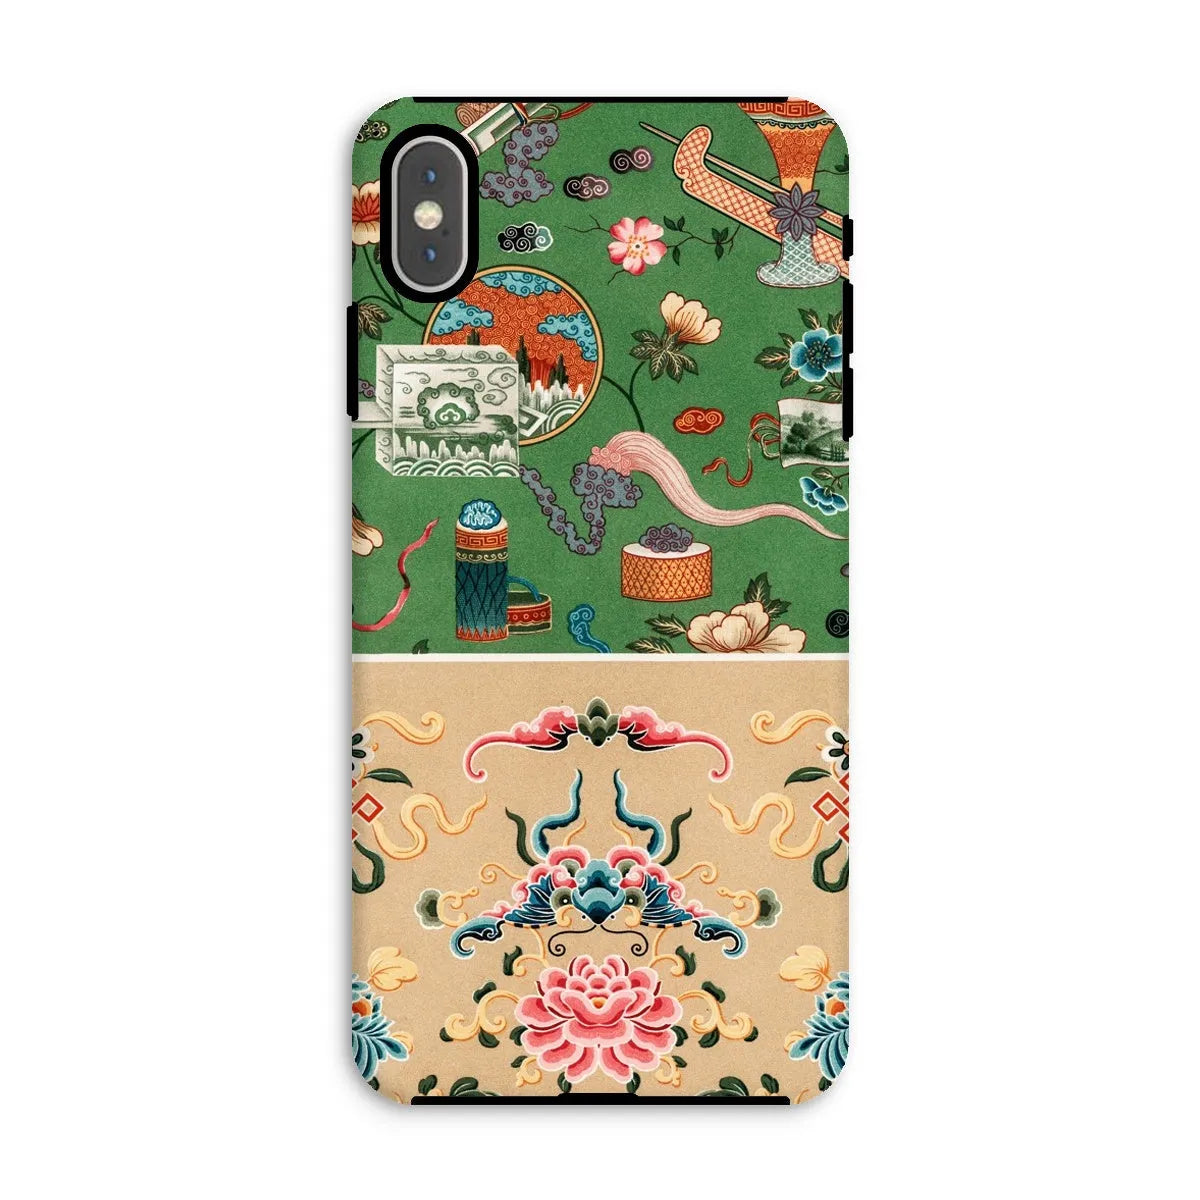 This Chinese Pattern By Auguste Racinet Tough Phone Case - Iphone Xs Max / Matte - Mobile Phone Cases - Aesthetic Art